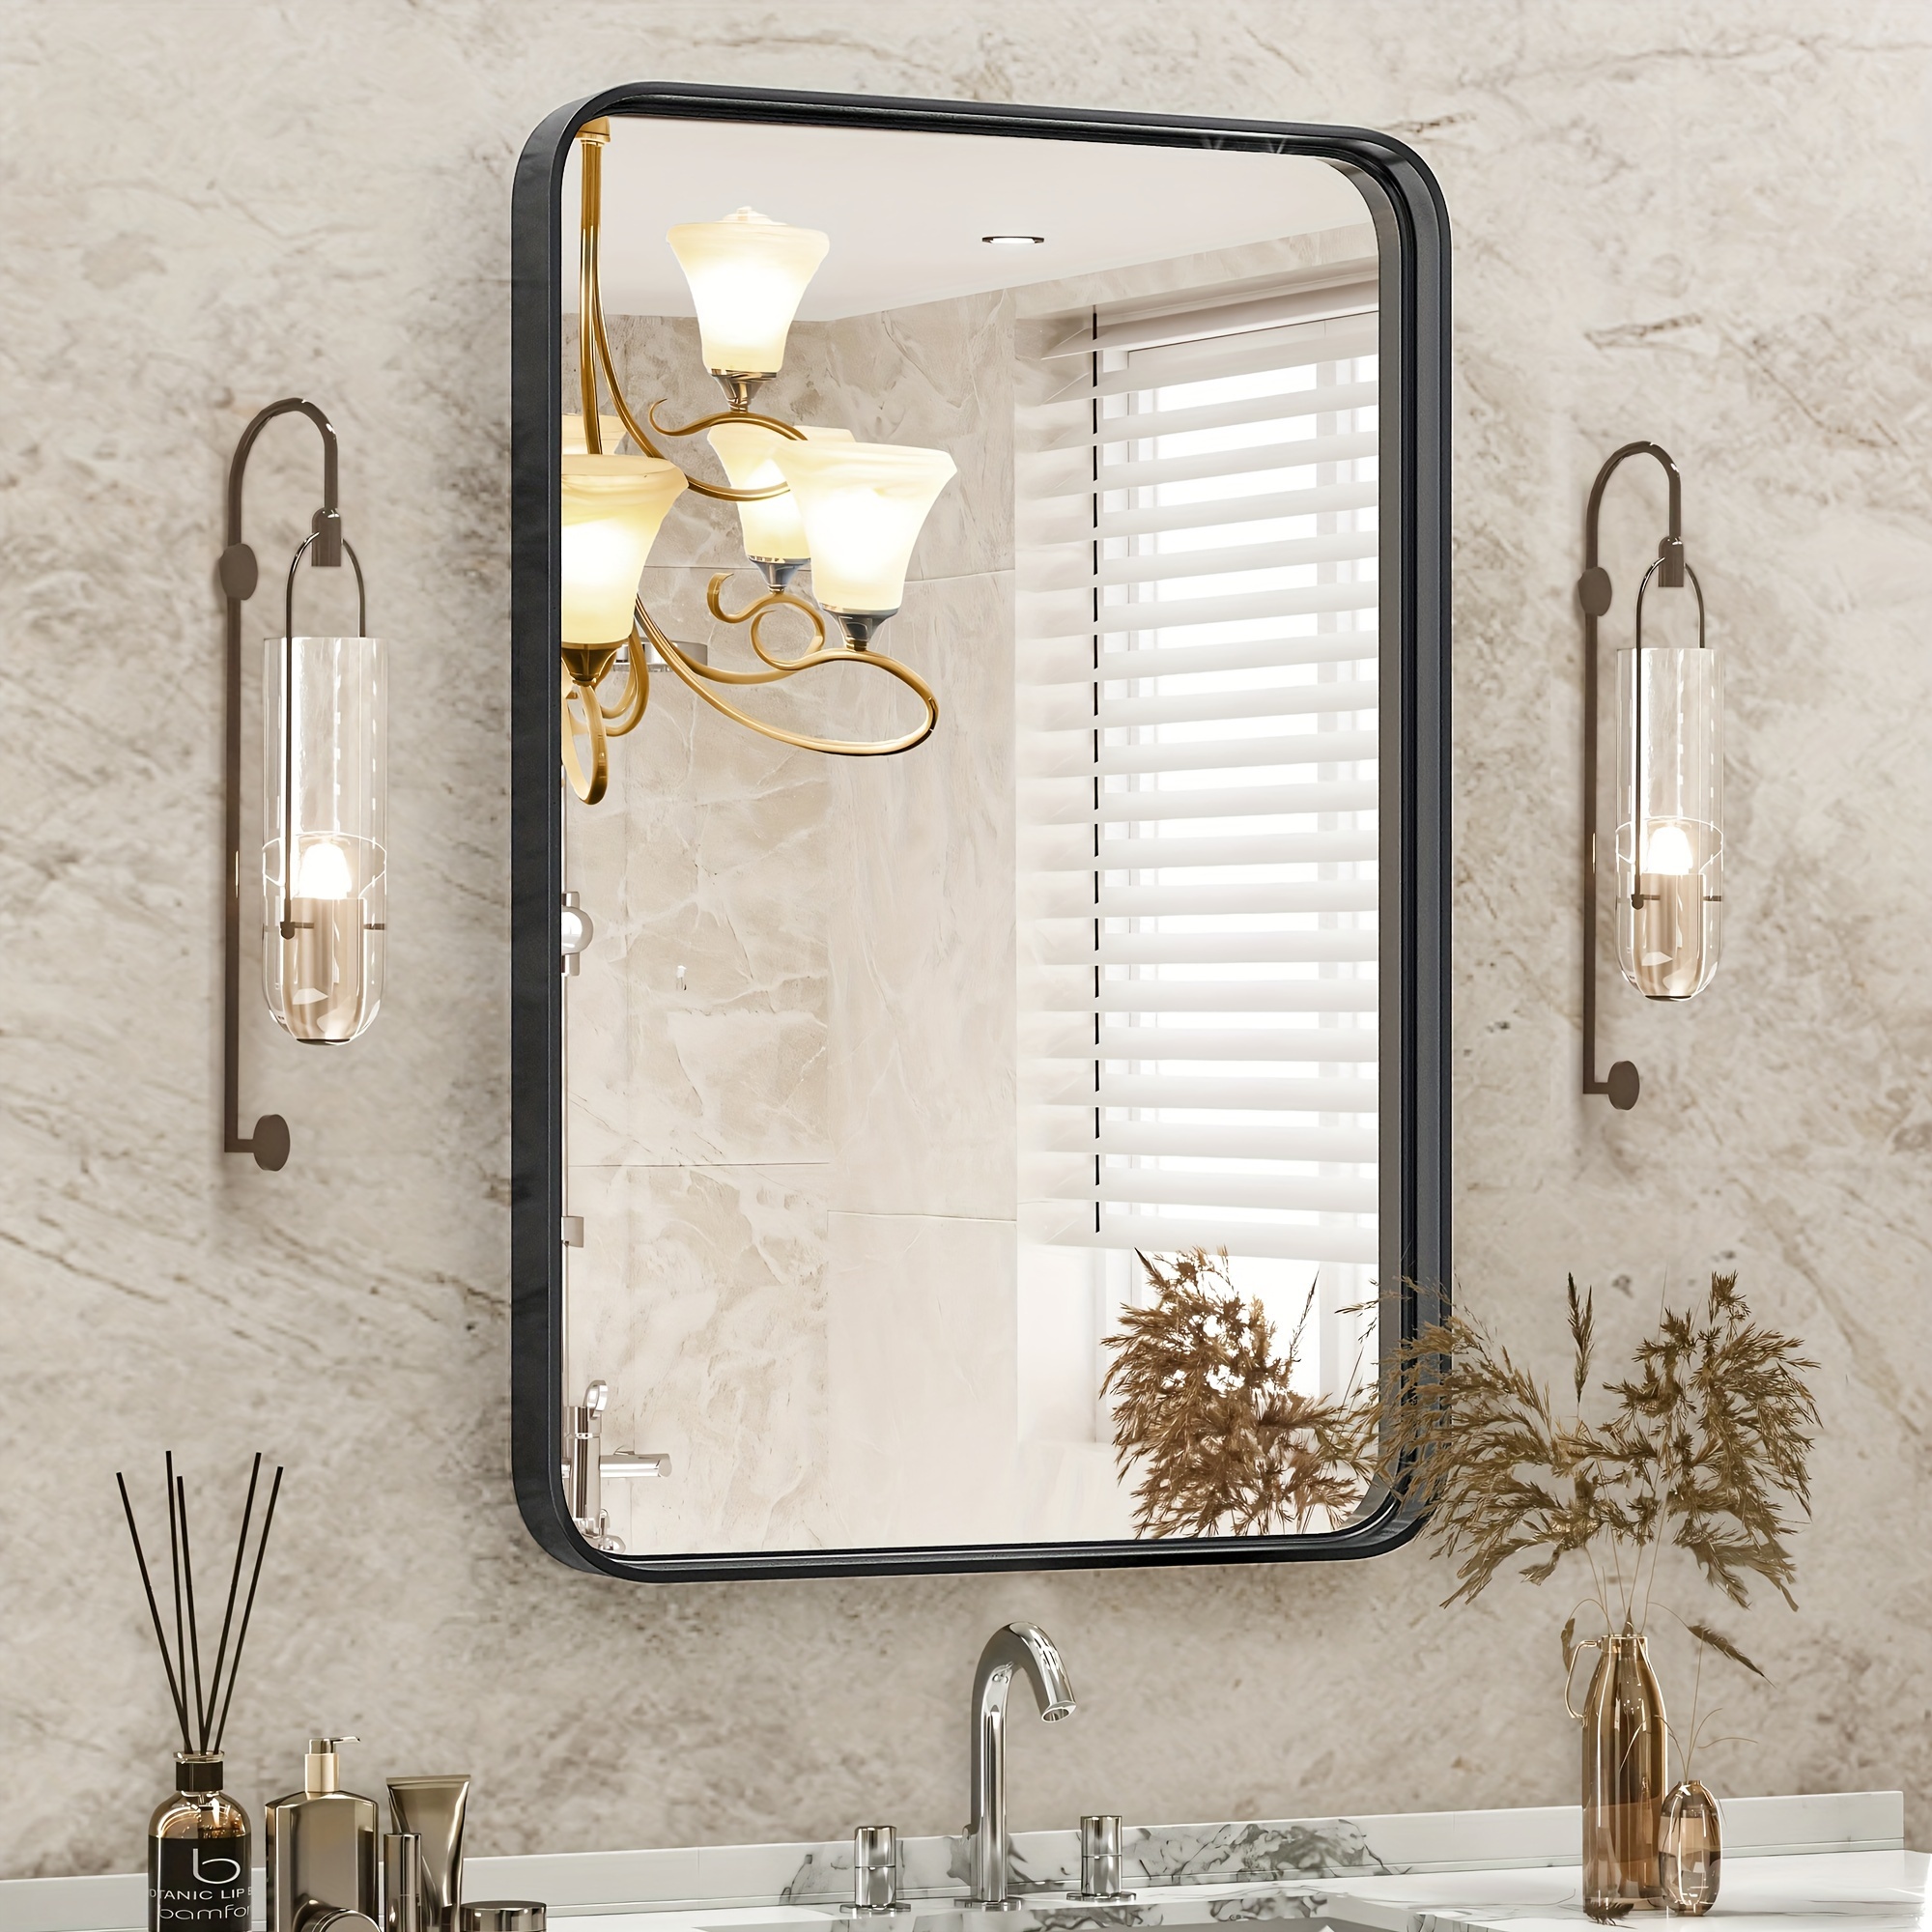 

Bathroom Mirror Wall Mirror For Hotel Bathroom Black Metal Framed Rounded Corner Rectangle Vanity Mirror, Large Mirrors For Wall, Anti-rust, Tempered Glass, Hangs Horizontally Or Vertically